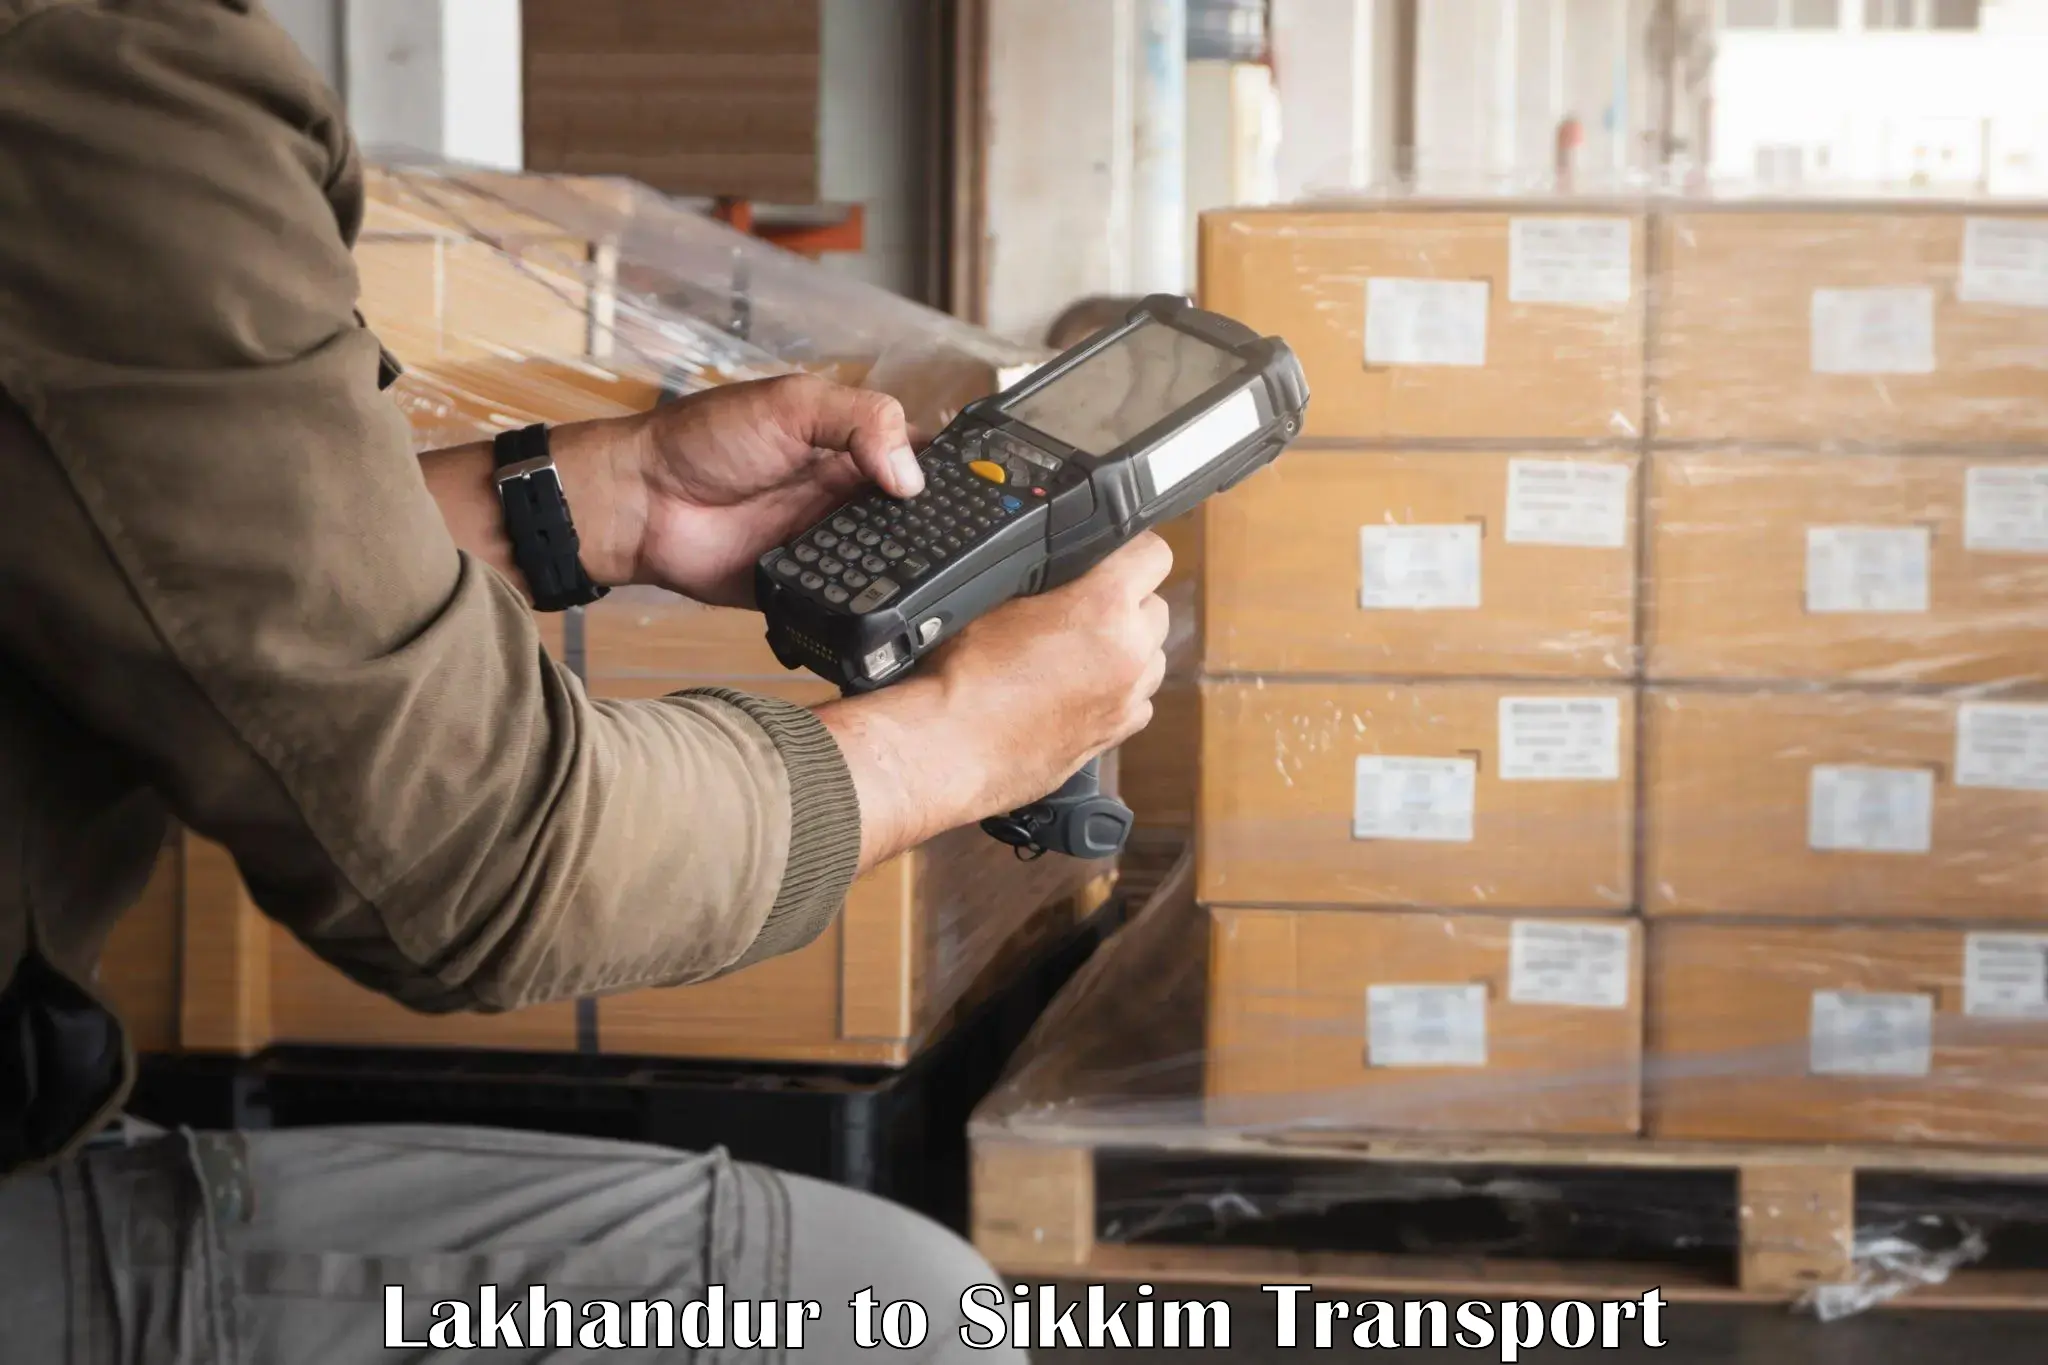 Delivery service Lakhandur to Sikkim